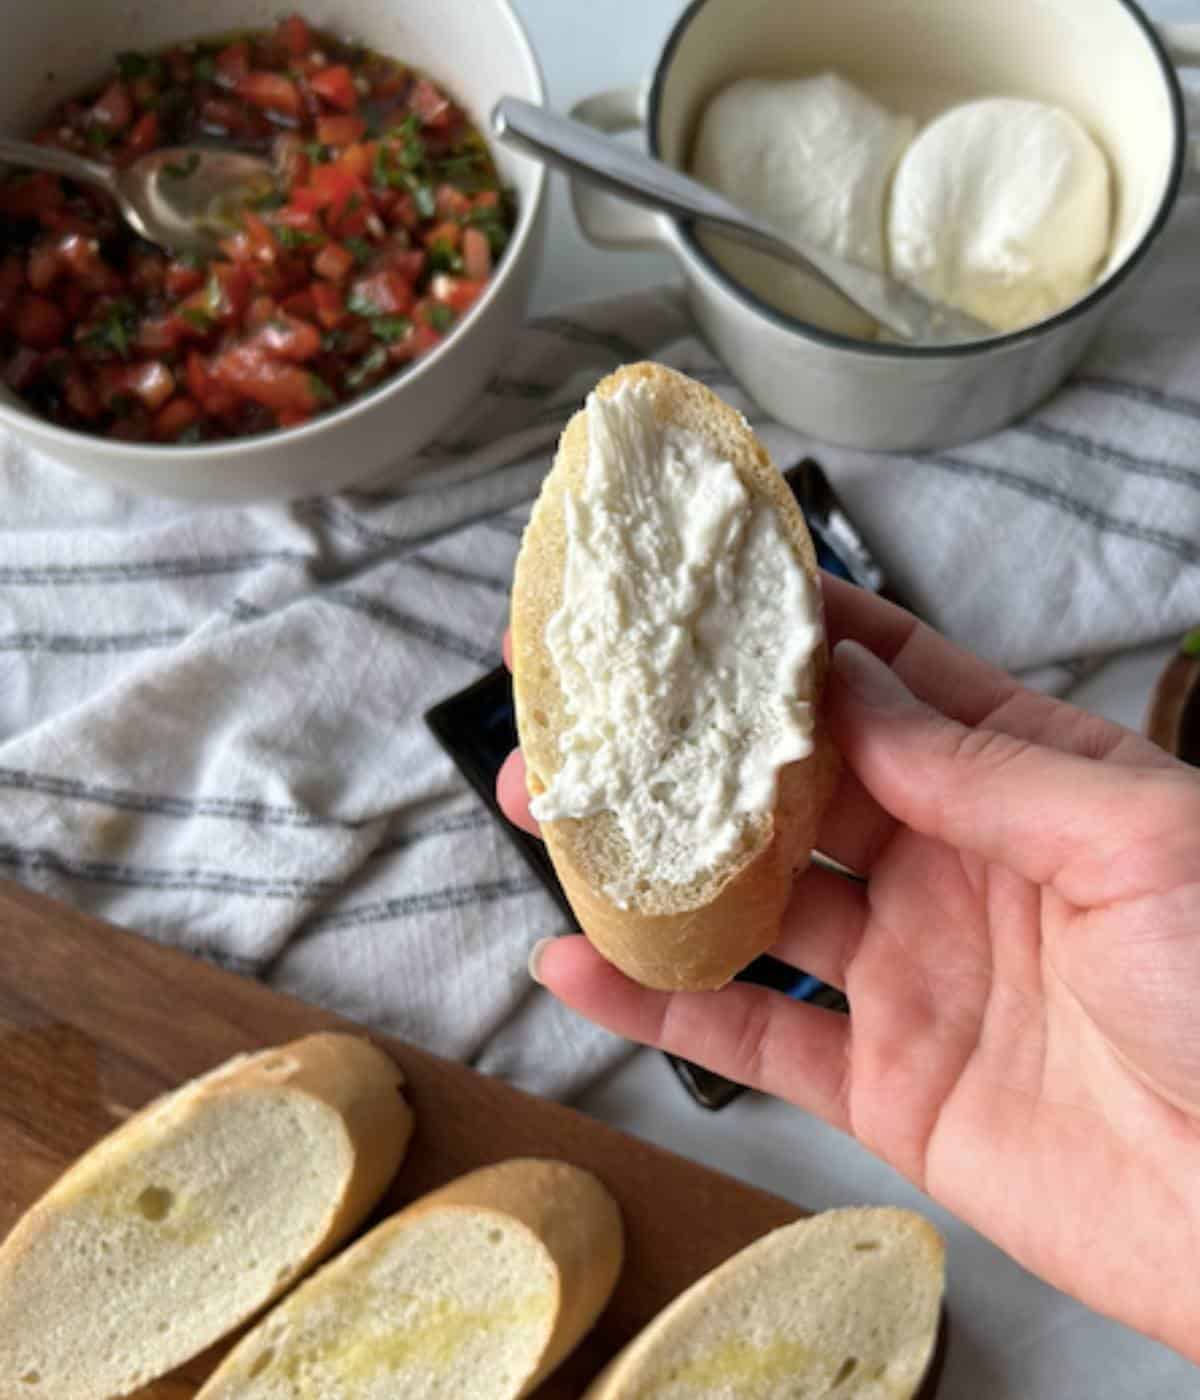 Hand holding piece of toasted french bread with creamy burrata spread onto it.